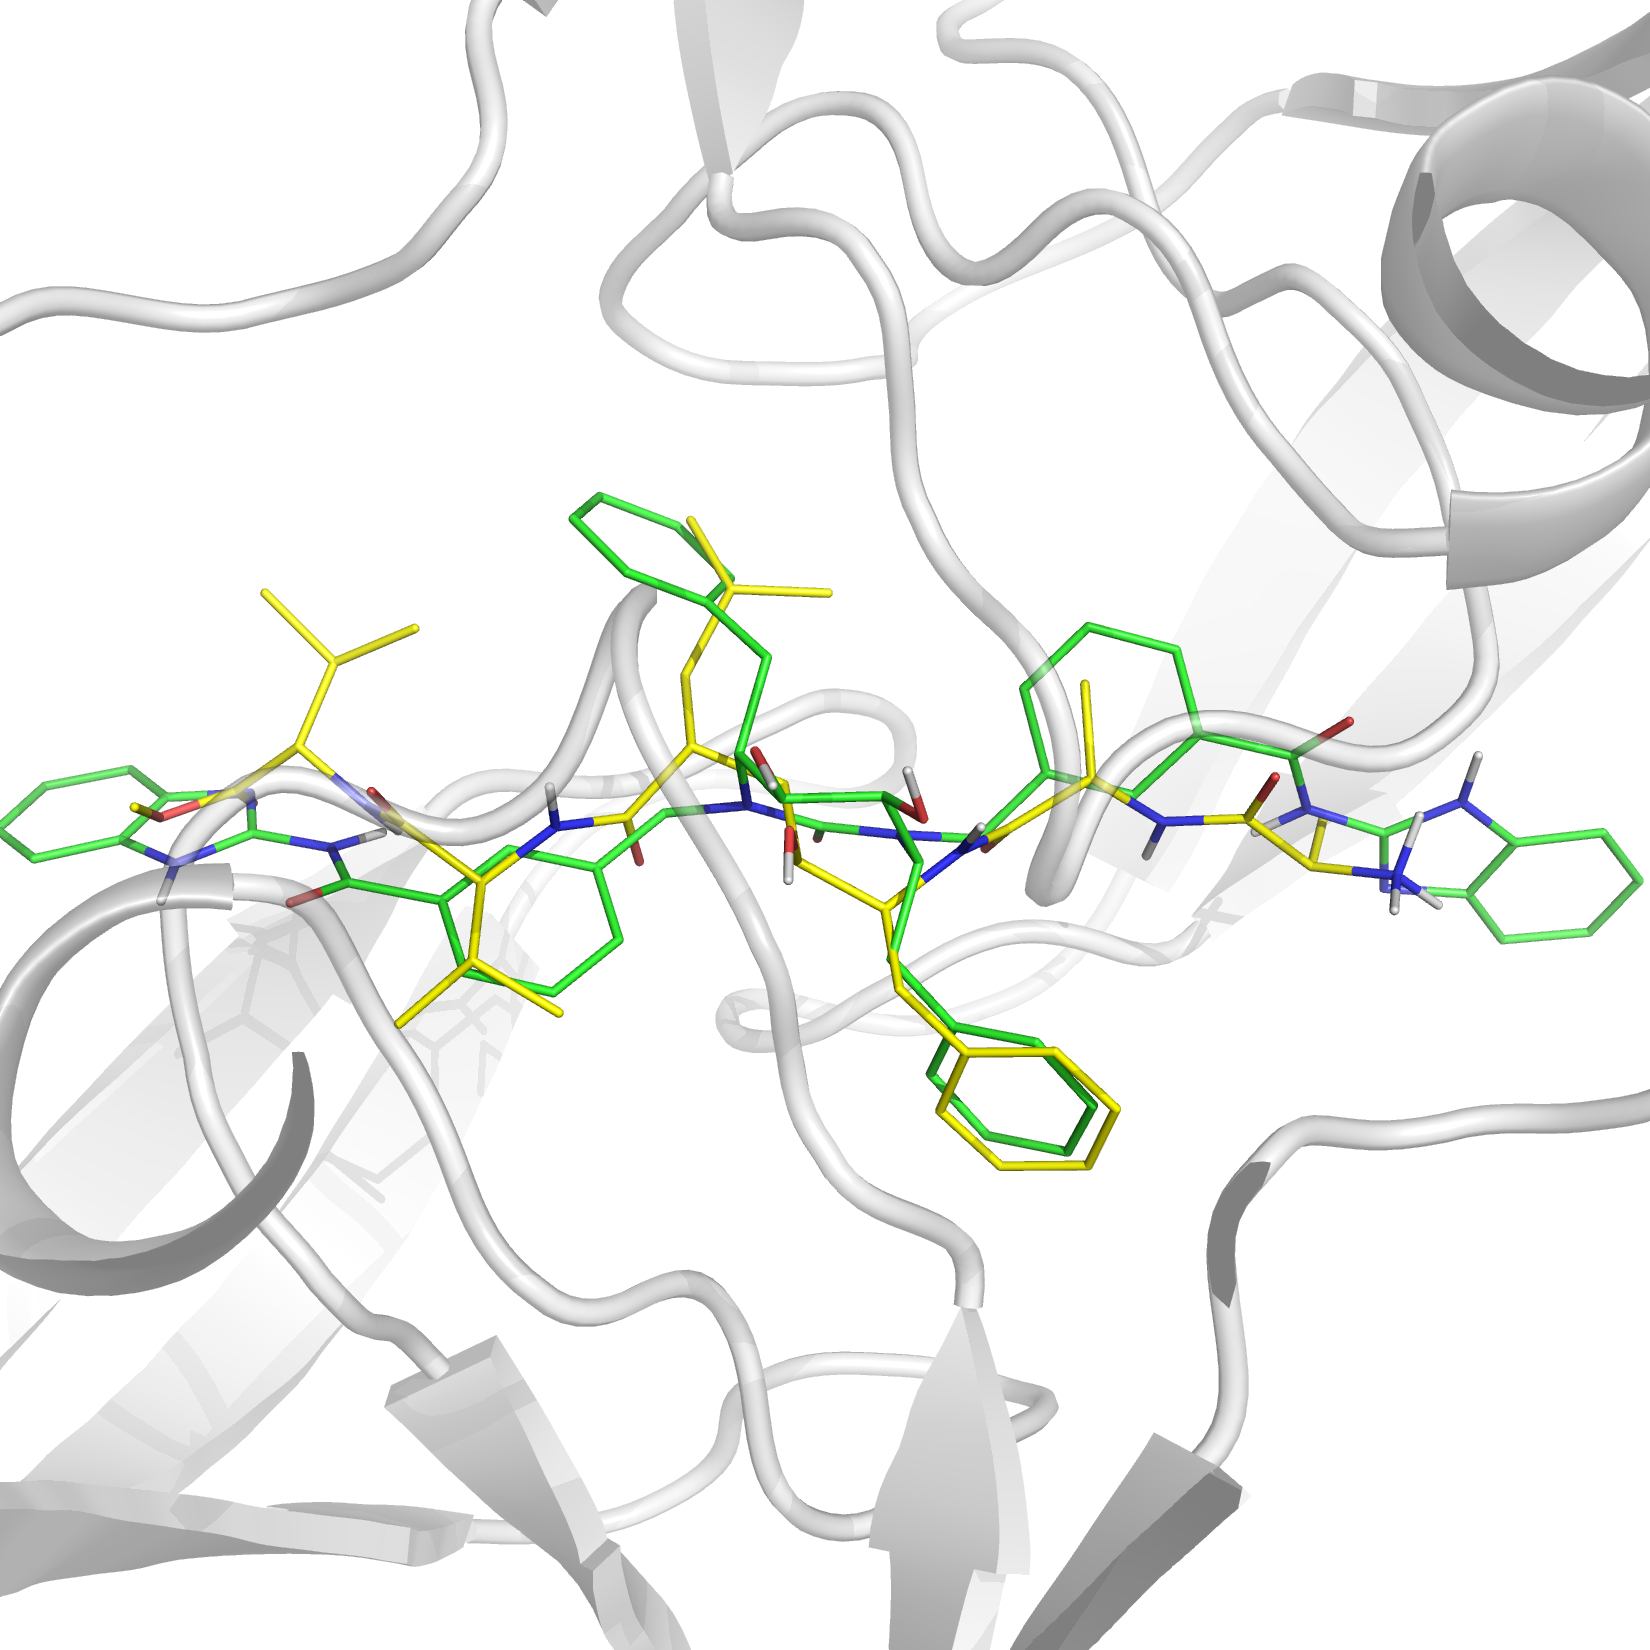 A virtual screening to find novel inhibitors for HIV protease was performed on the ZINC database.1 A critical part in virtual screening and associated techniques is preliminary database filtering and size reduction and for that purpose a novel feature matrix matching procedure was used. The reduction of ∼14 million available ligands to a subset of 14299 ligands was achieved with a structure based approach where the analysis of the 3D structure of the active site of the protease produced a graph with hydrogen bond donor, hydrogen bond acceptor and hydrophobic subsites represented as graph nodes. A similar treatment was also applied to the compound database content and the comparison of binding site and ligand graphs was used to preselect potentially active ligands. The resulting set was further subjected to docking. The algorithm used was able to find several novel as well as previously known and experimentally tested ligands, demonstrating the validity of the approach.